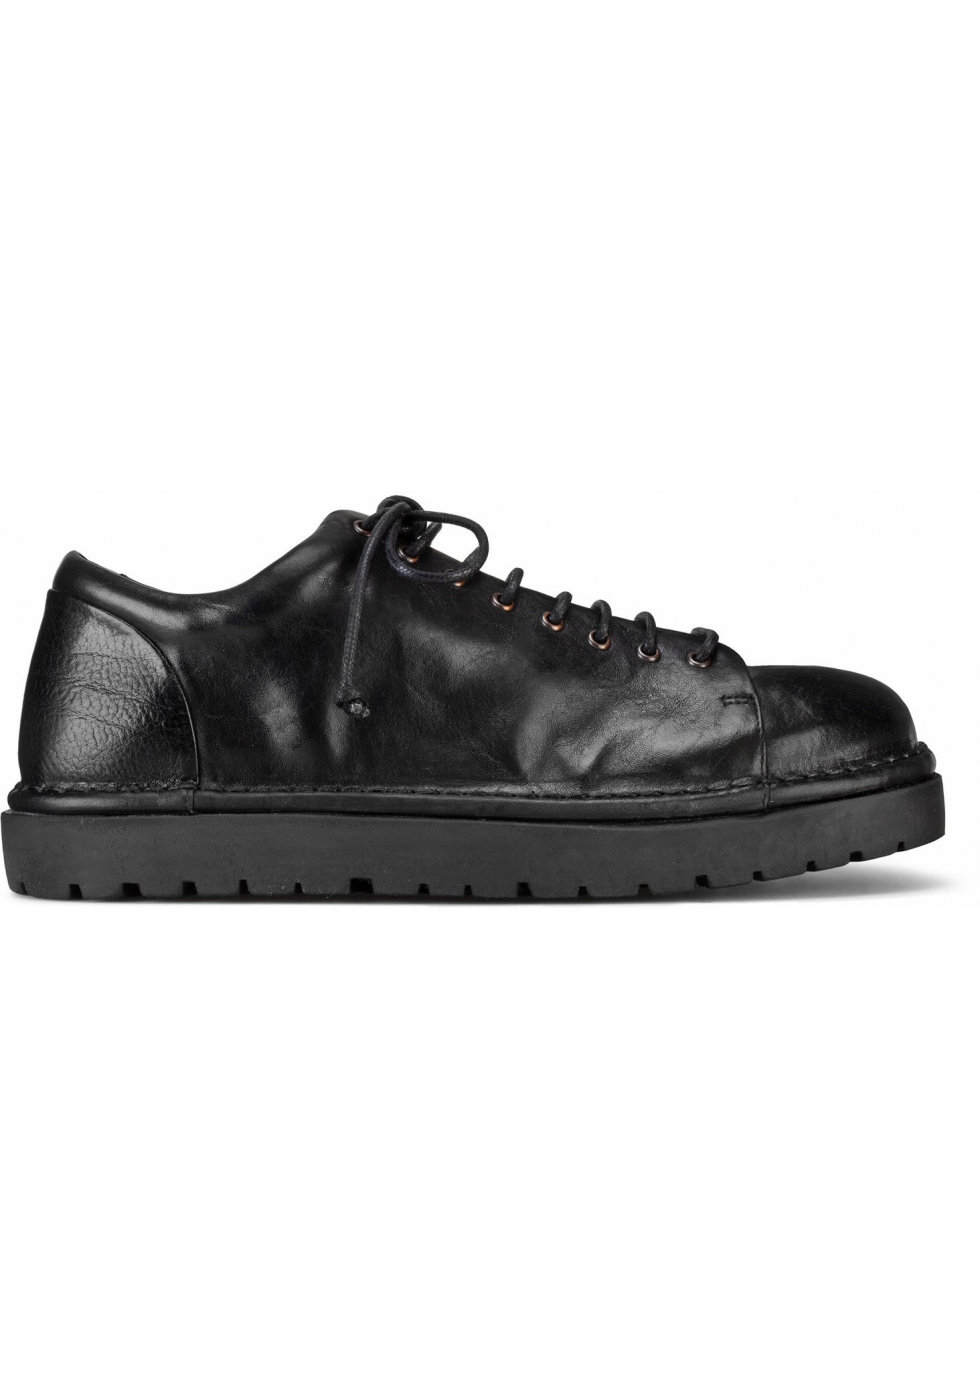 Marsèll Women's fashion lace-ups shoes in black calf leather made in ...